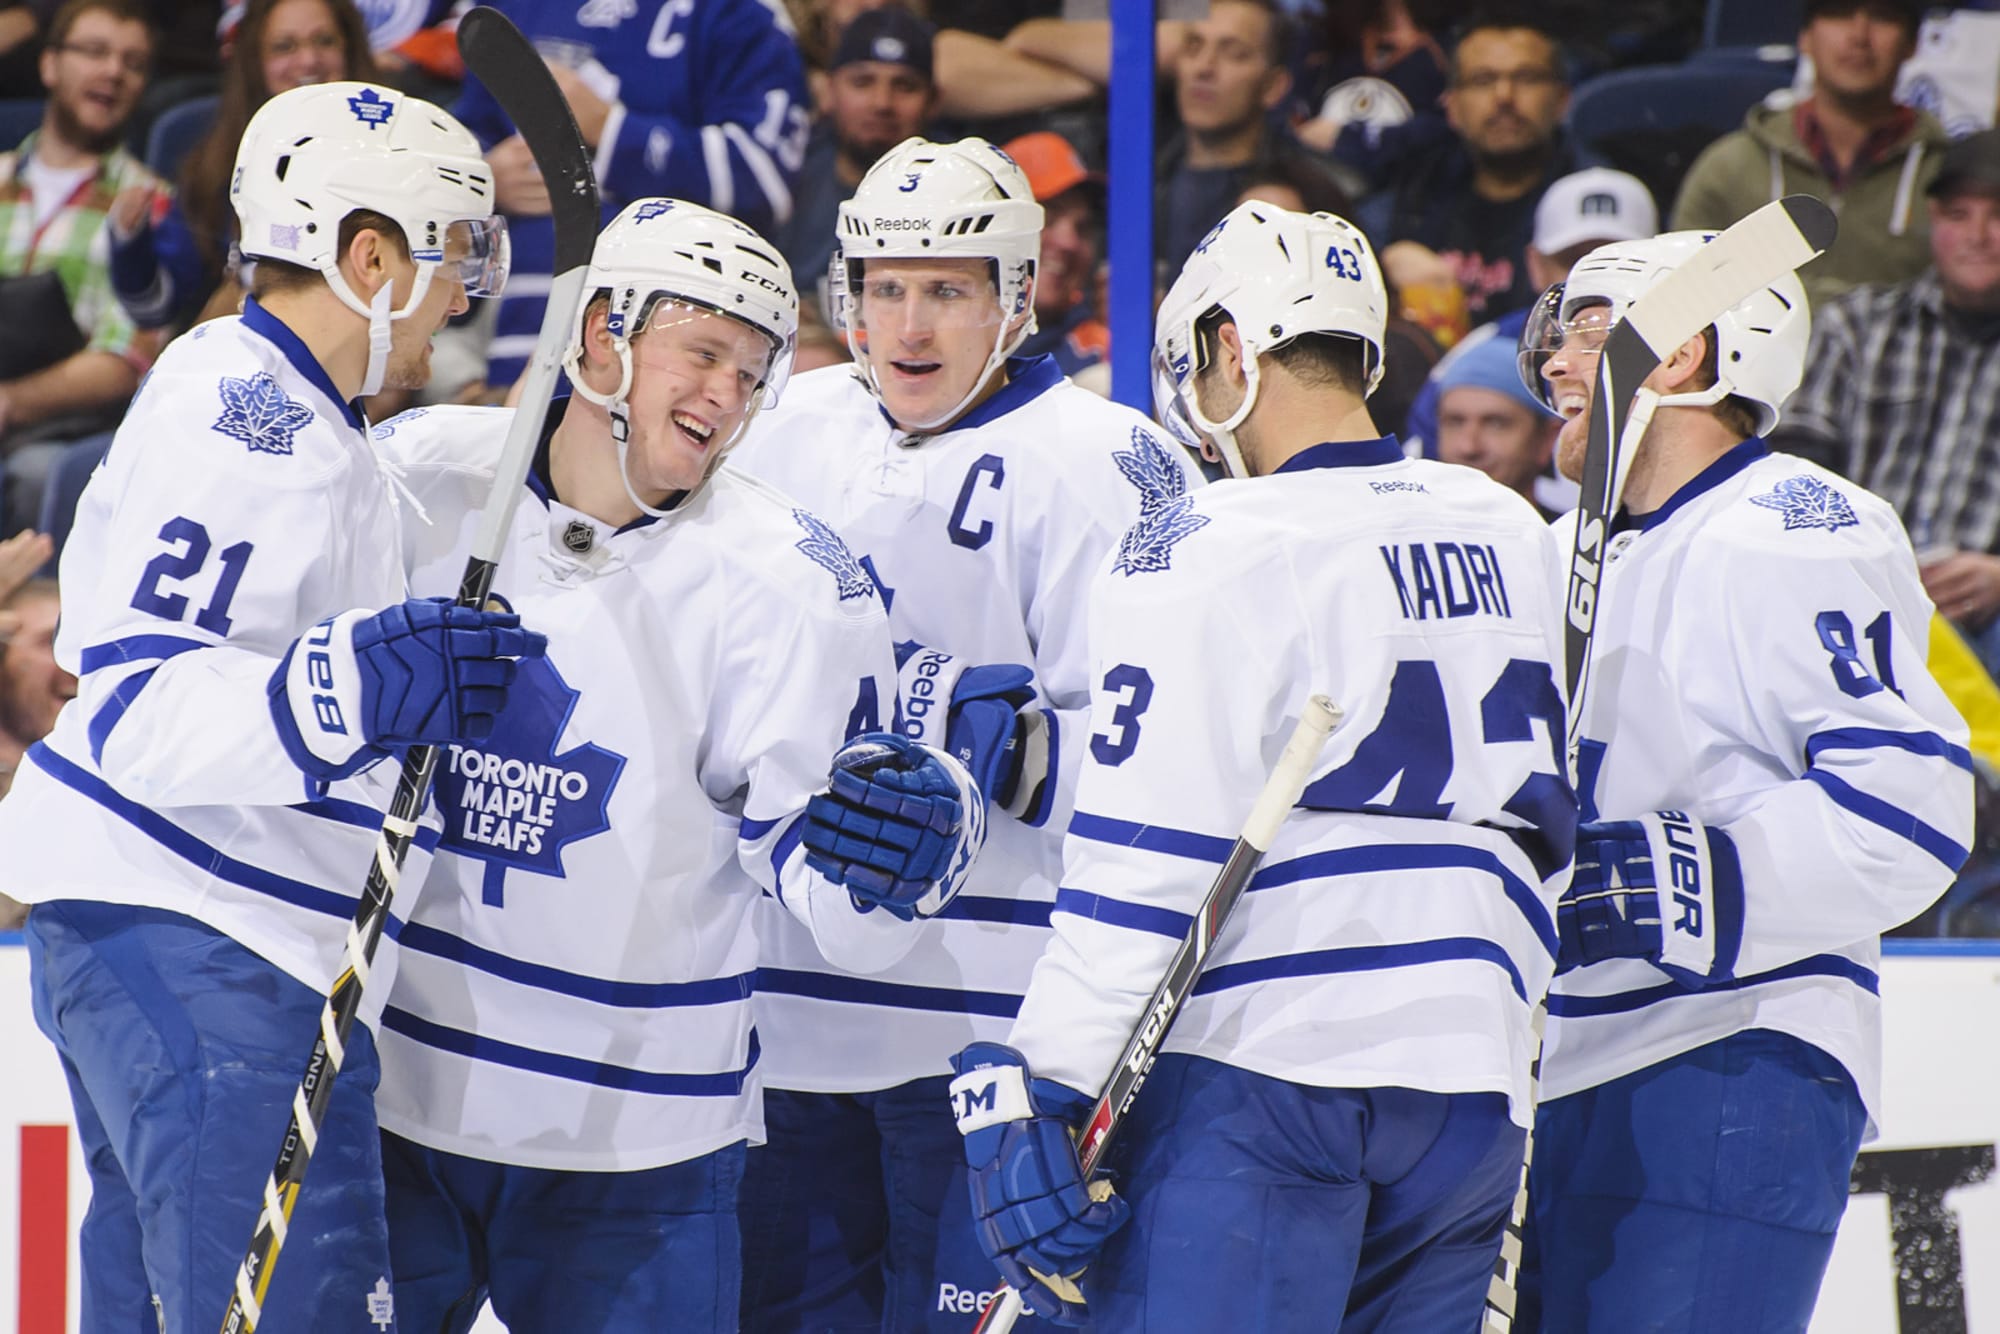 Justin Bieber on Toronto Maple Leafs' Cup chances: 'This is the year